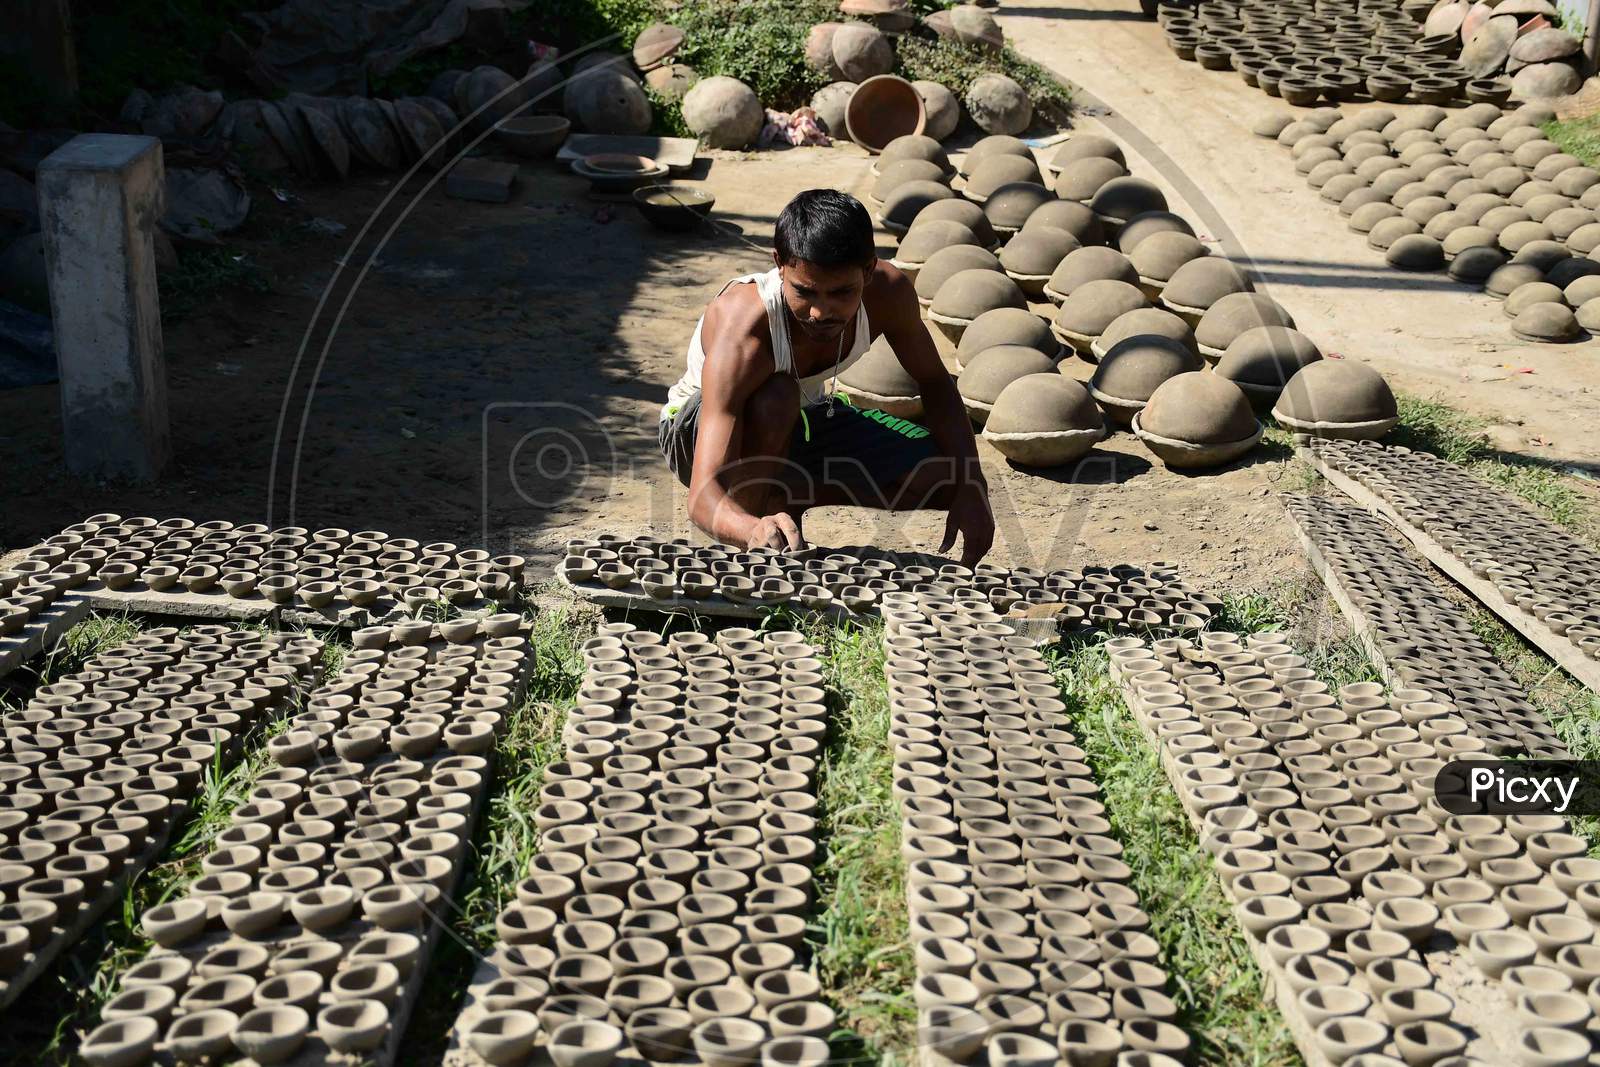 A  Potter arranging  earthen lamps being sun dried for upcoming Diwali festival at Rupohi village in Nagaon District of Assam on Nov 10,2020.